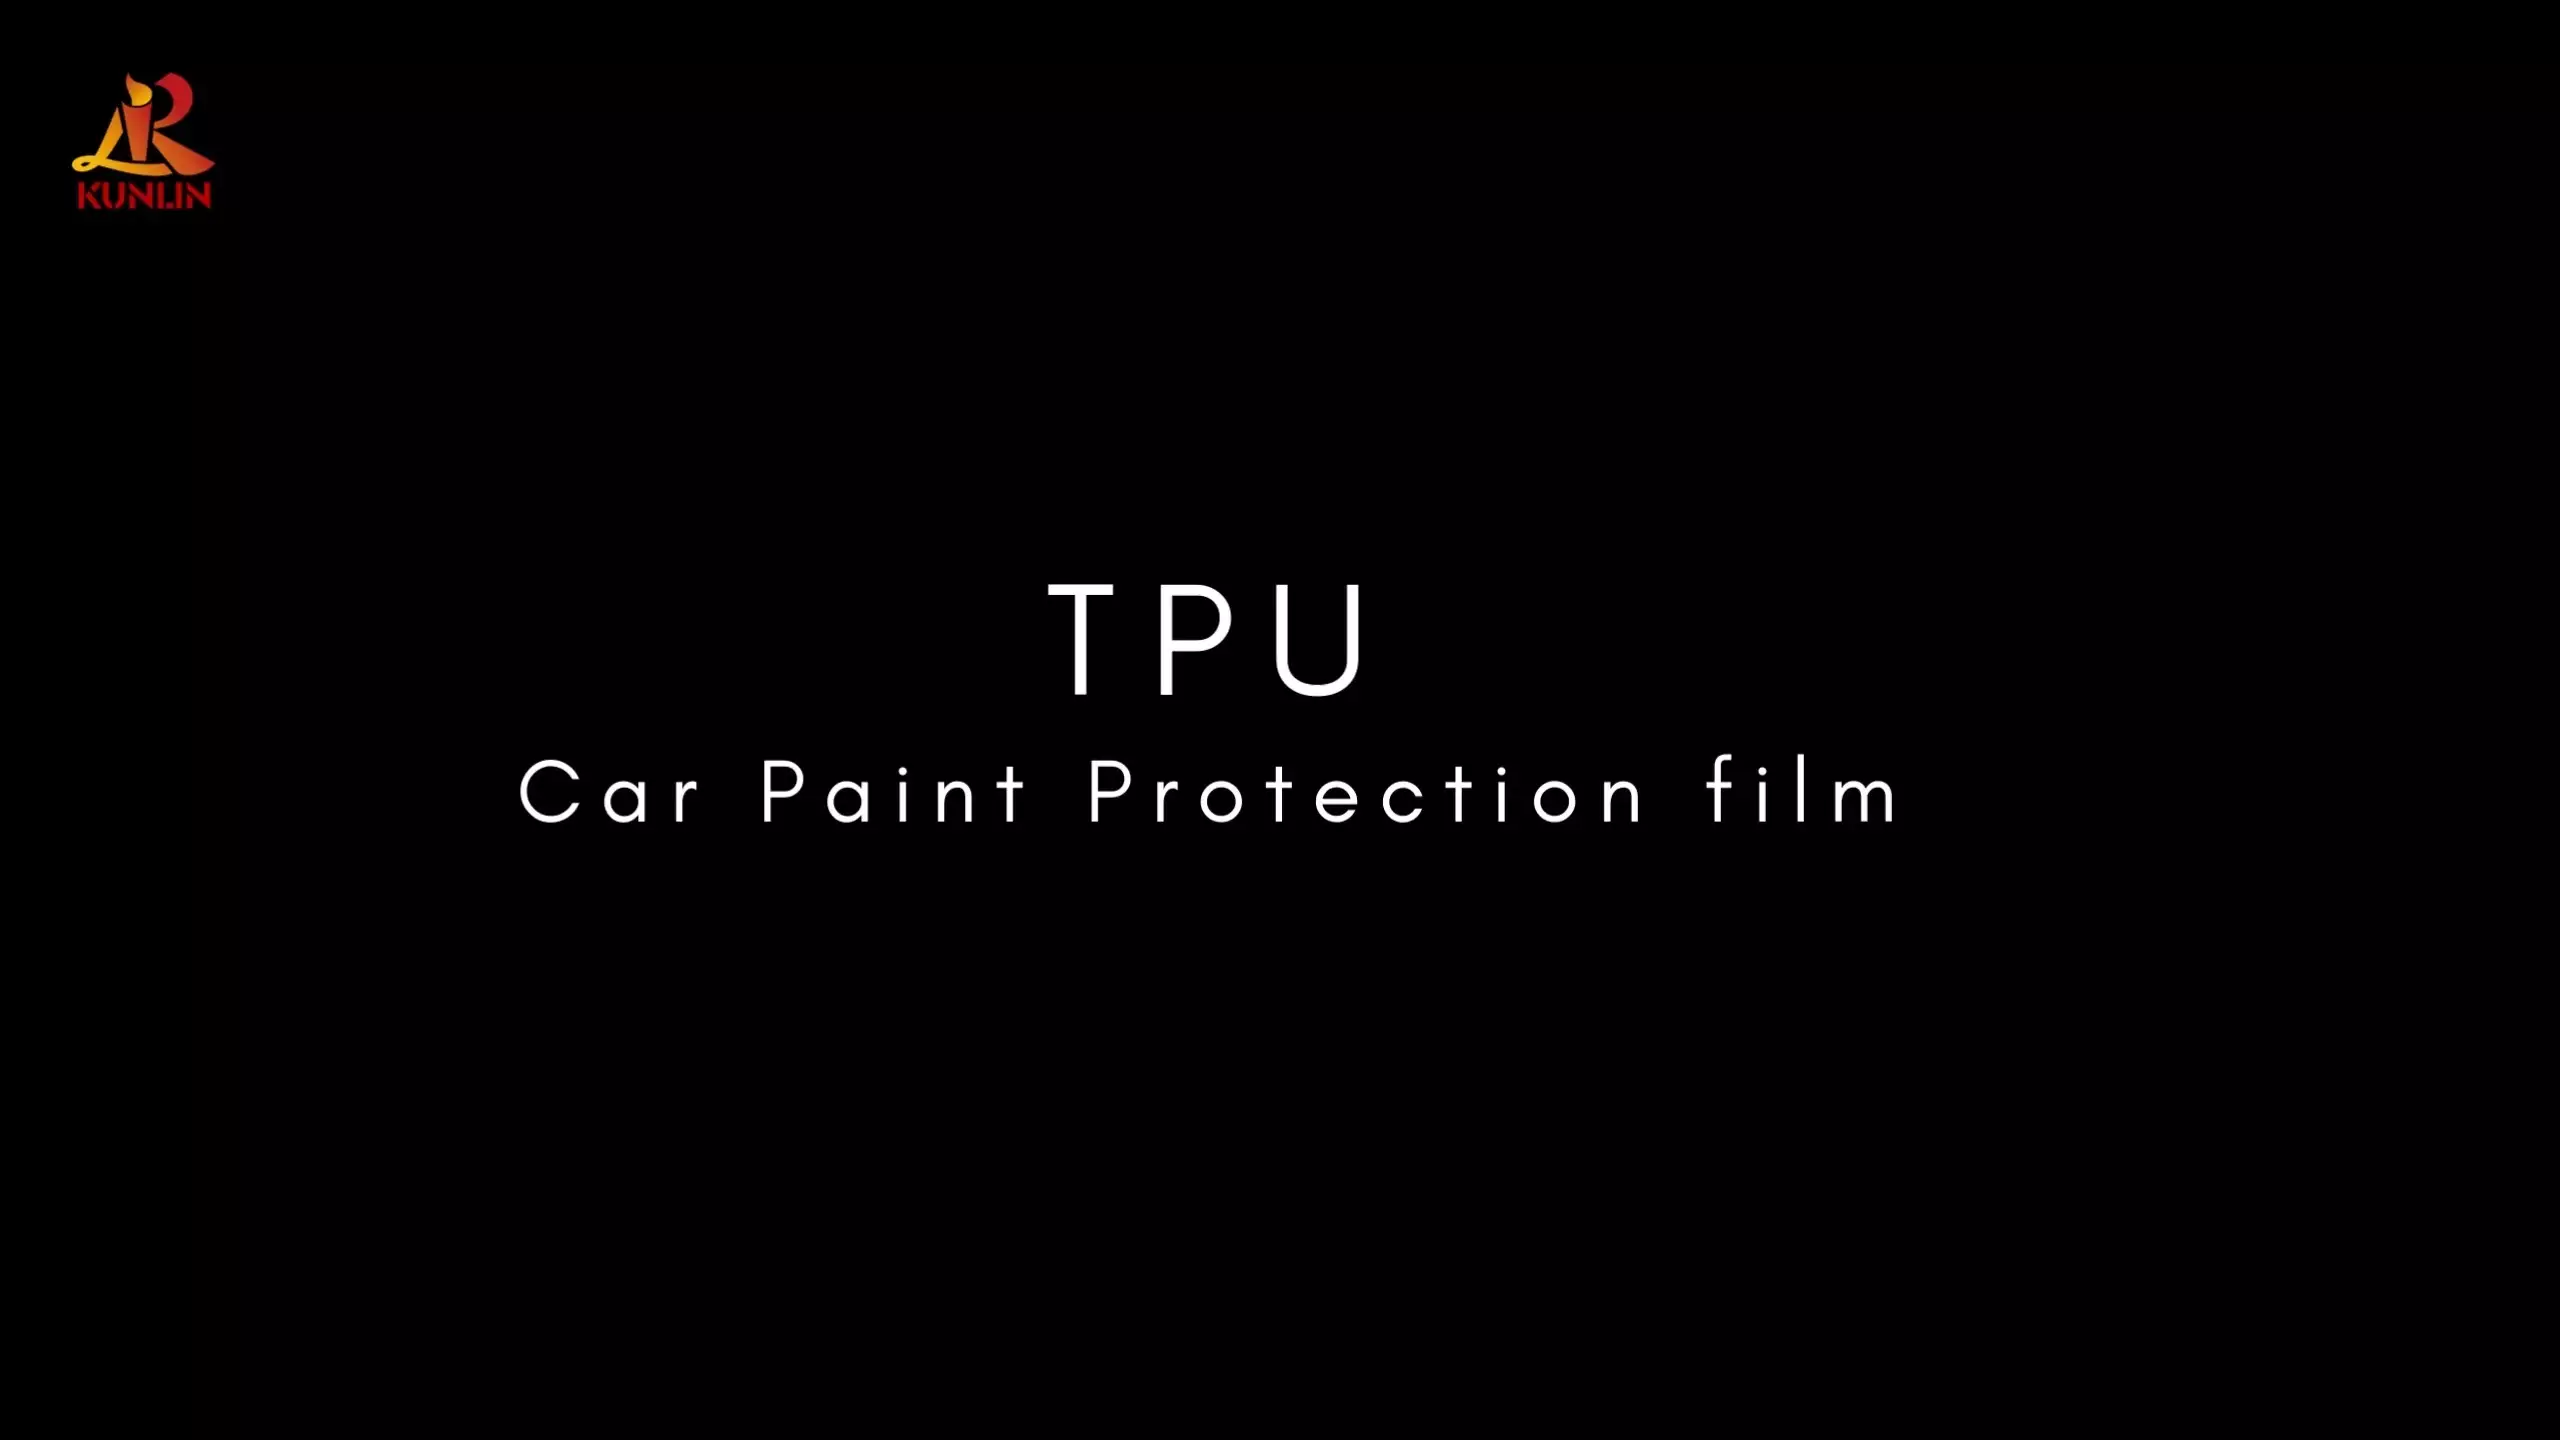 Protect Your Car Paint Better with TPU Car PPF: Hear the Post-Experience Feeling!